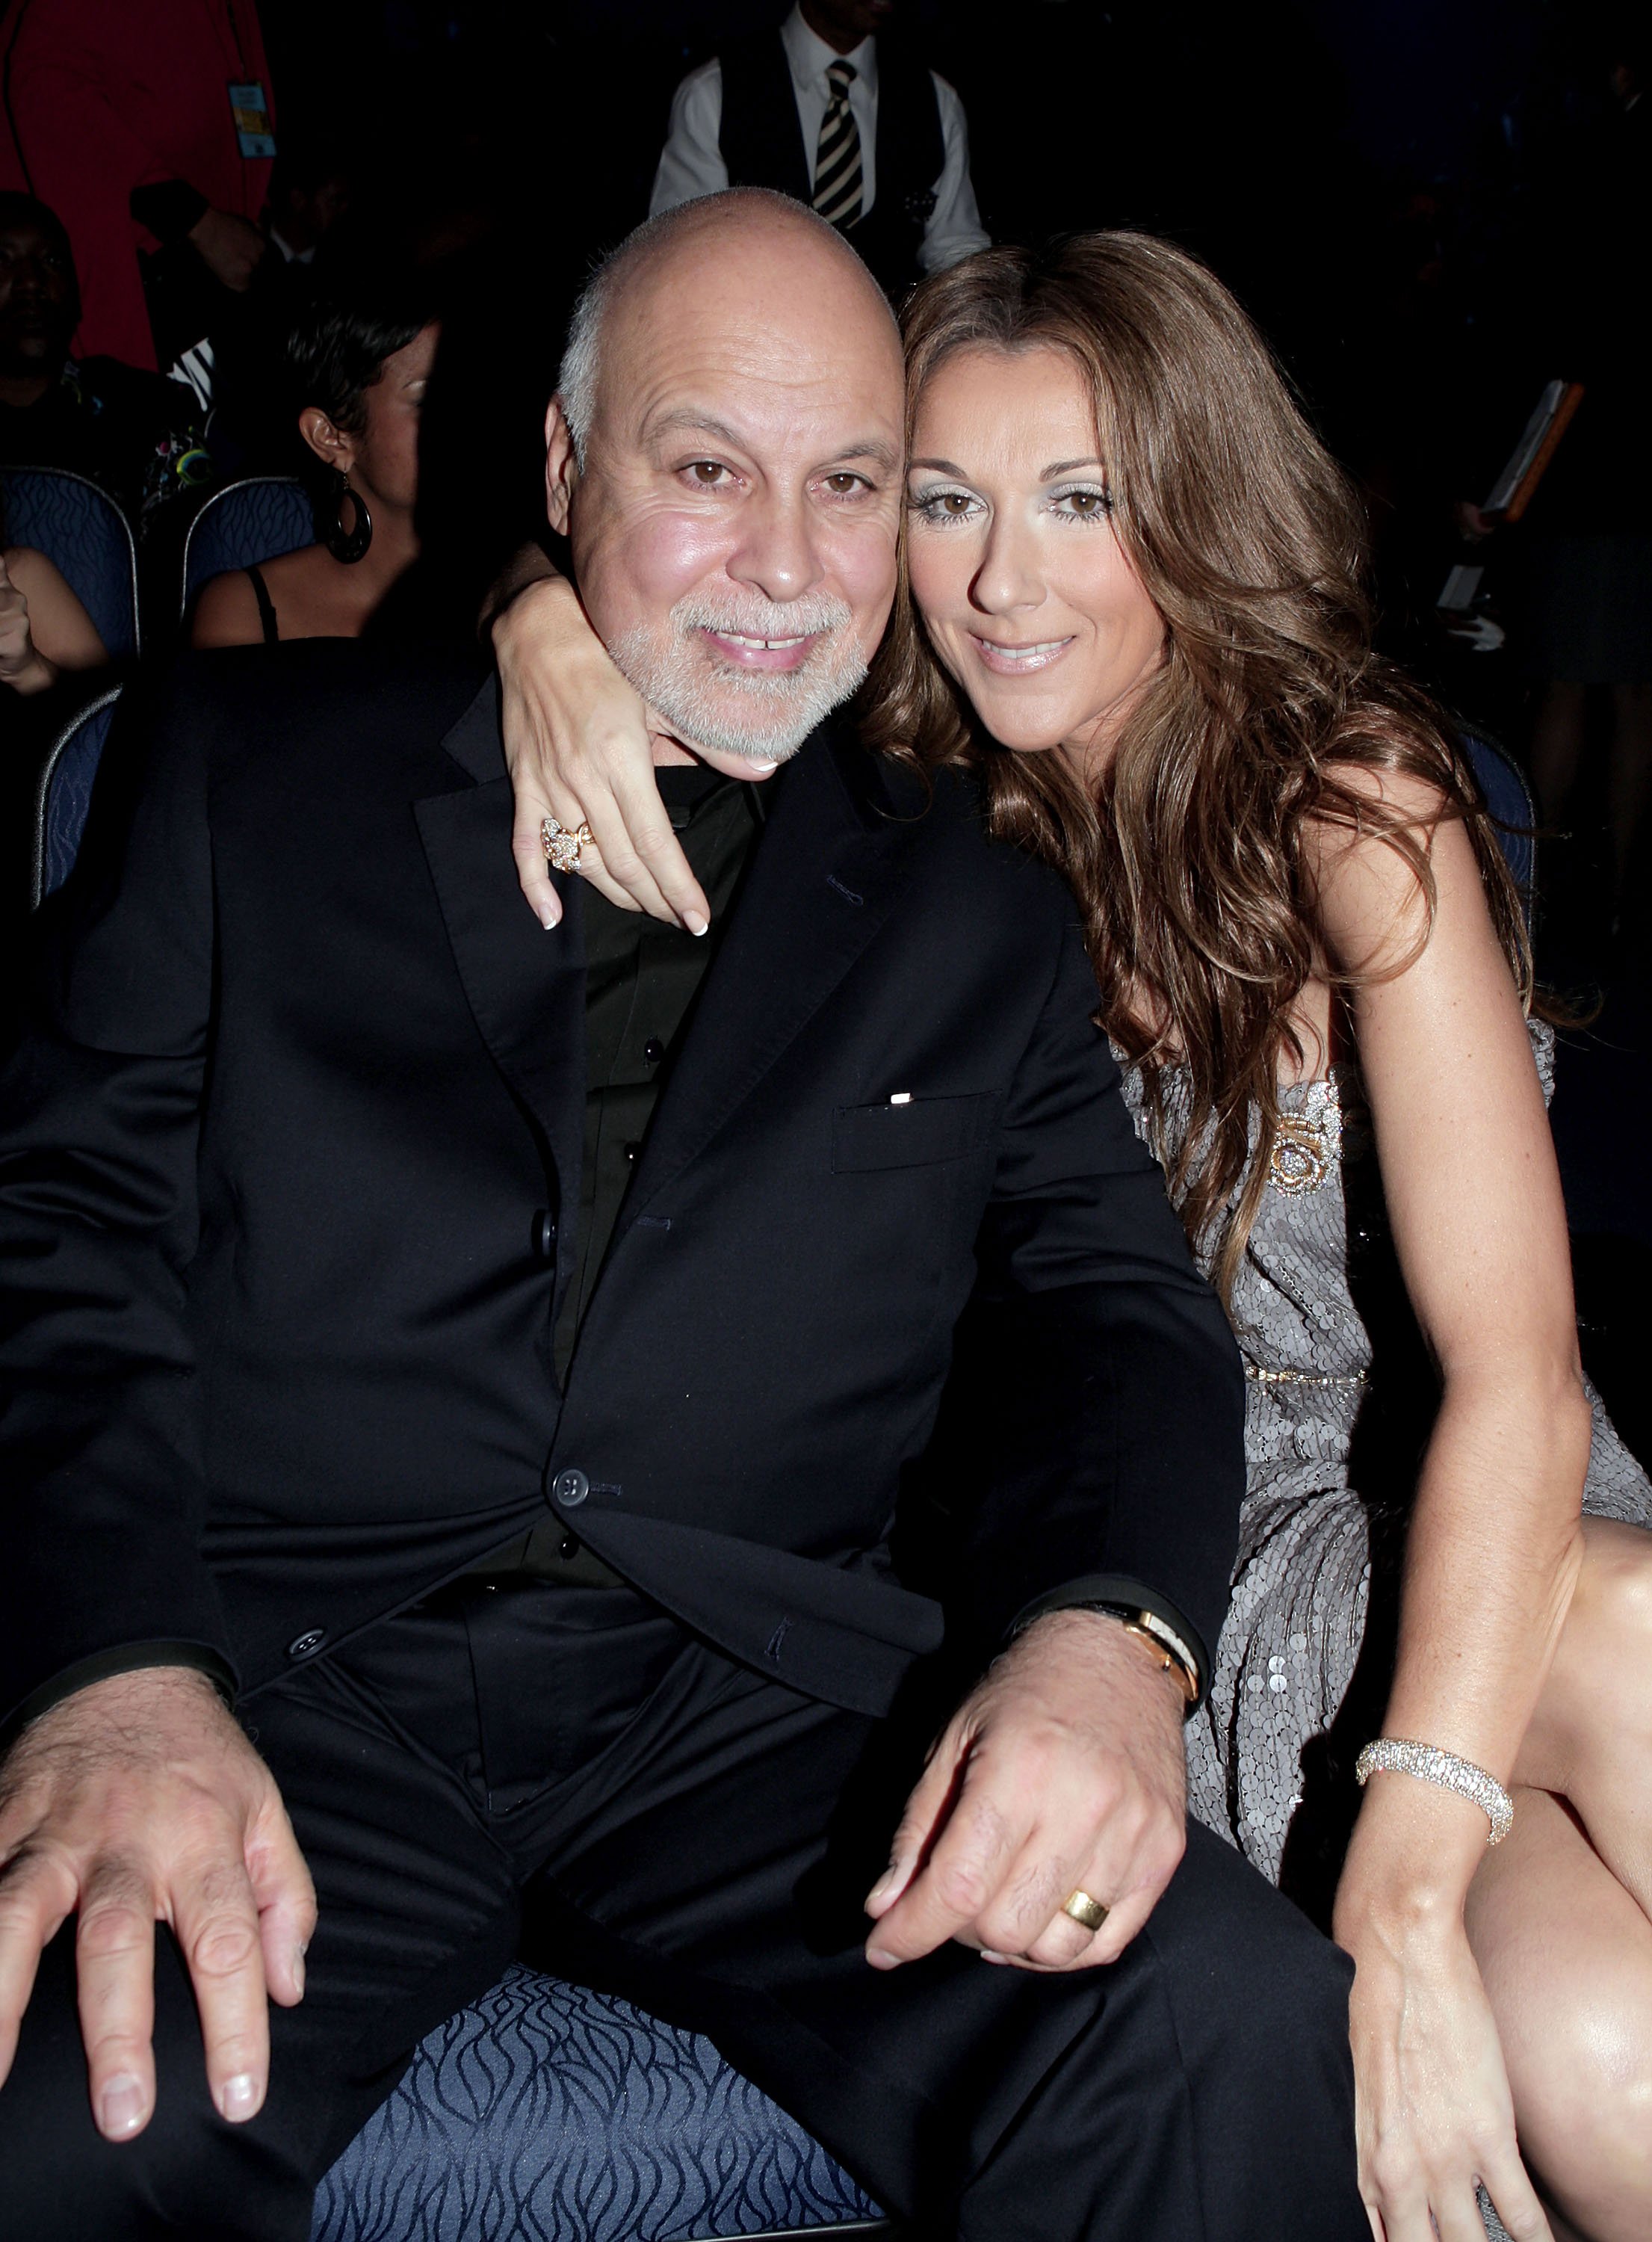 Celine Dion and her husband, Rene Angélil, attend the 2007 American Music Awards at the Nokia Theatre on November 18, 2007, in Los Angeles, California. | Source: Getty Images